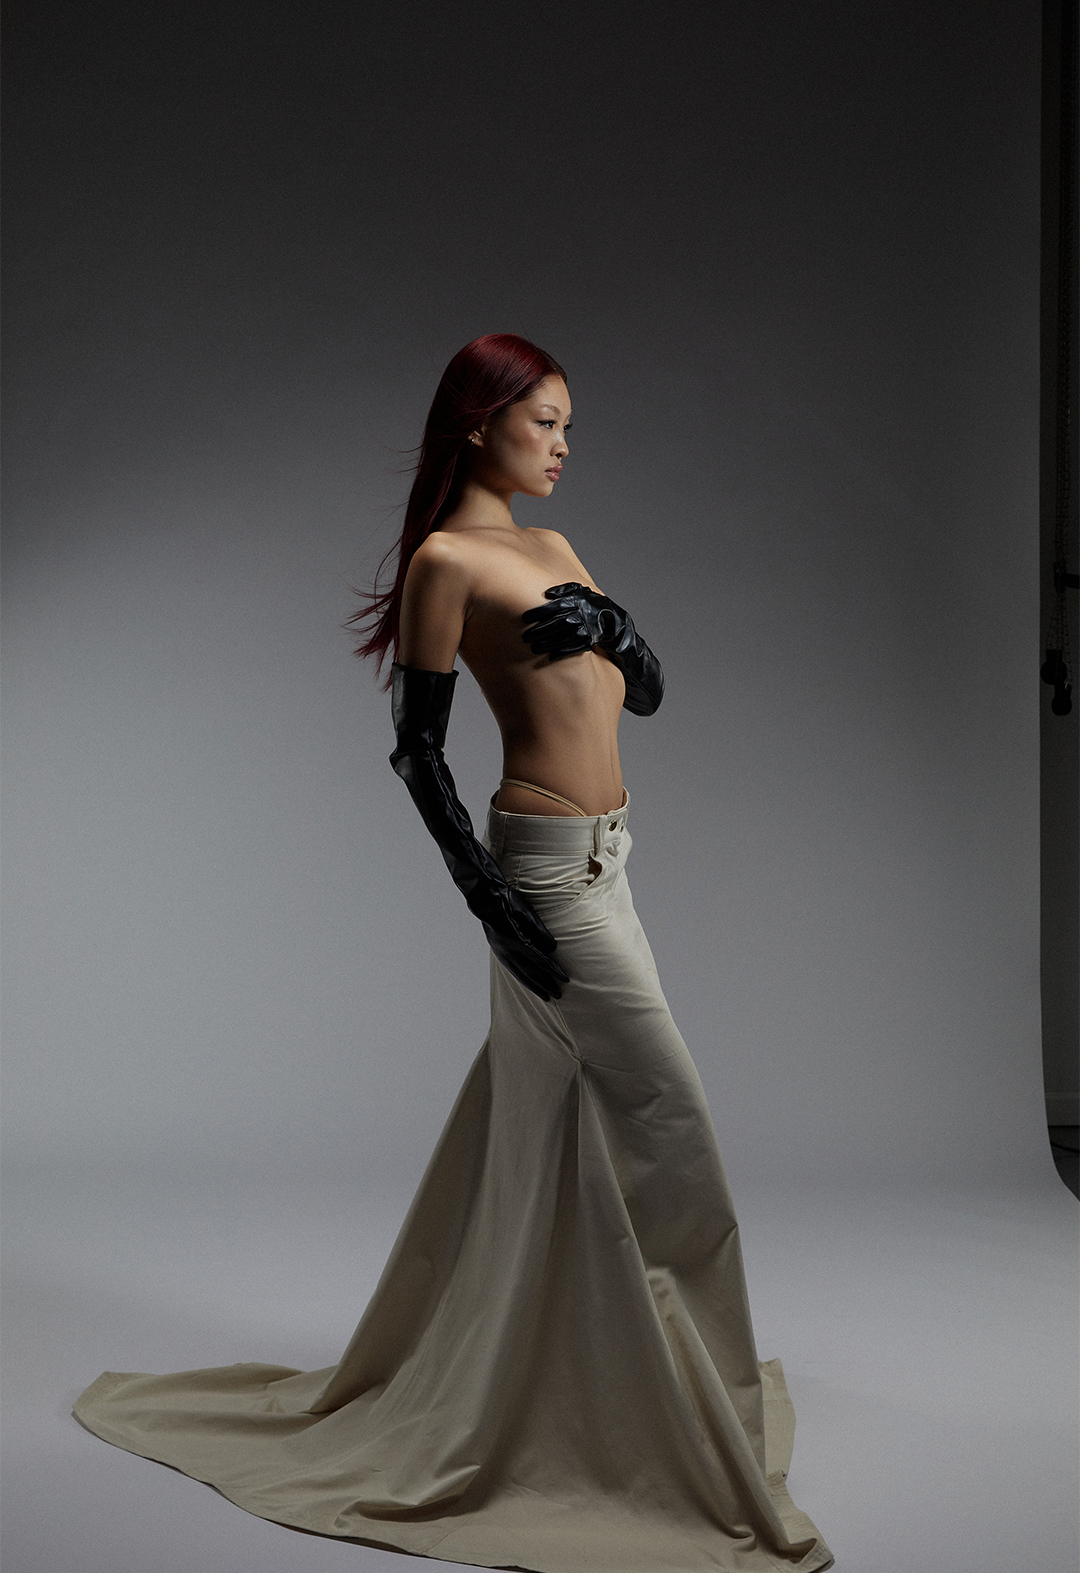 The photo shows a side view of a model wearing a denim maxi skirt.